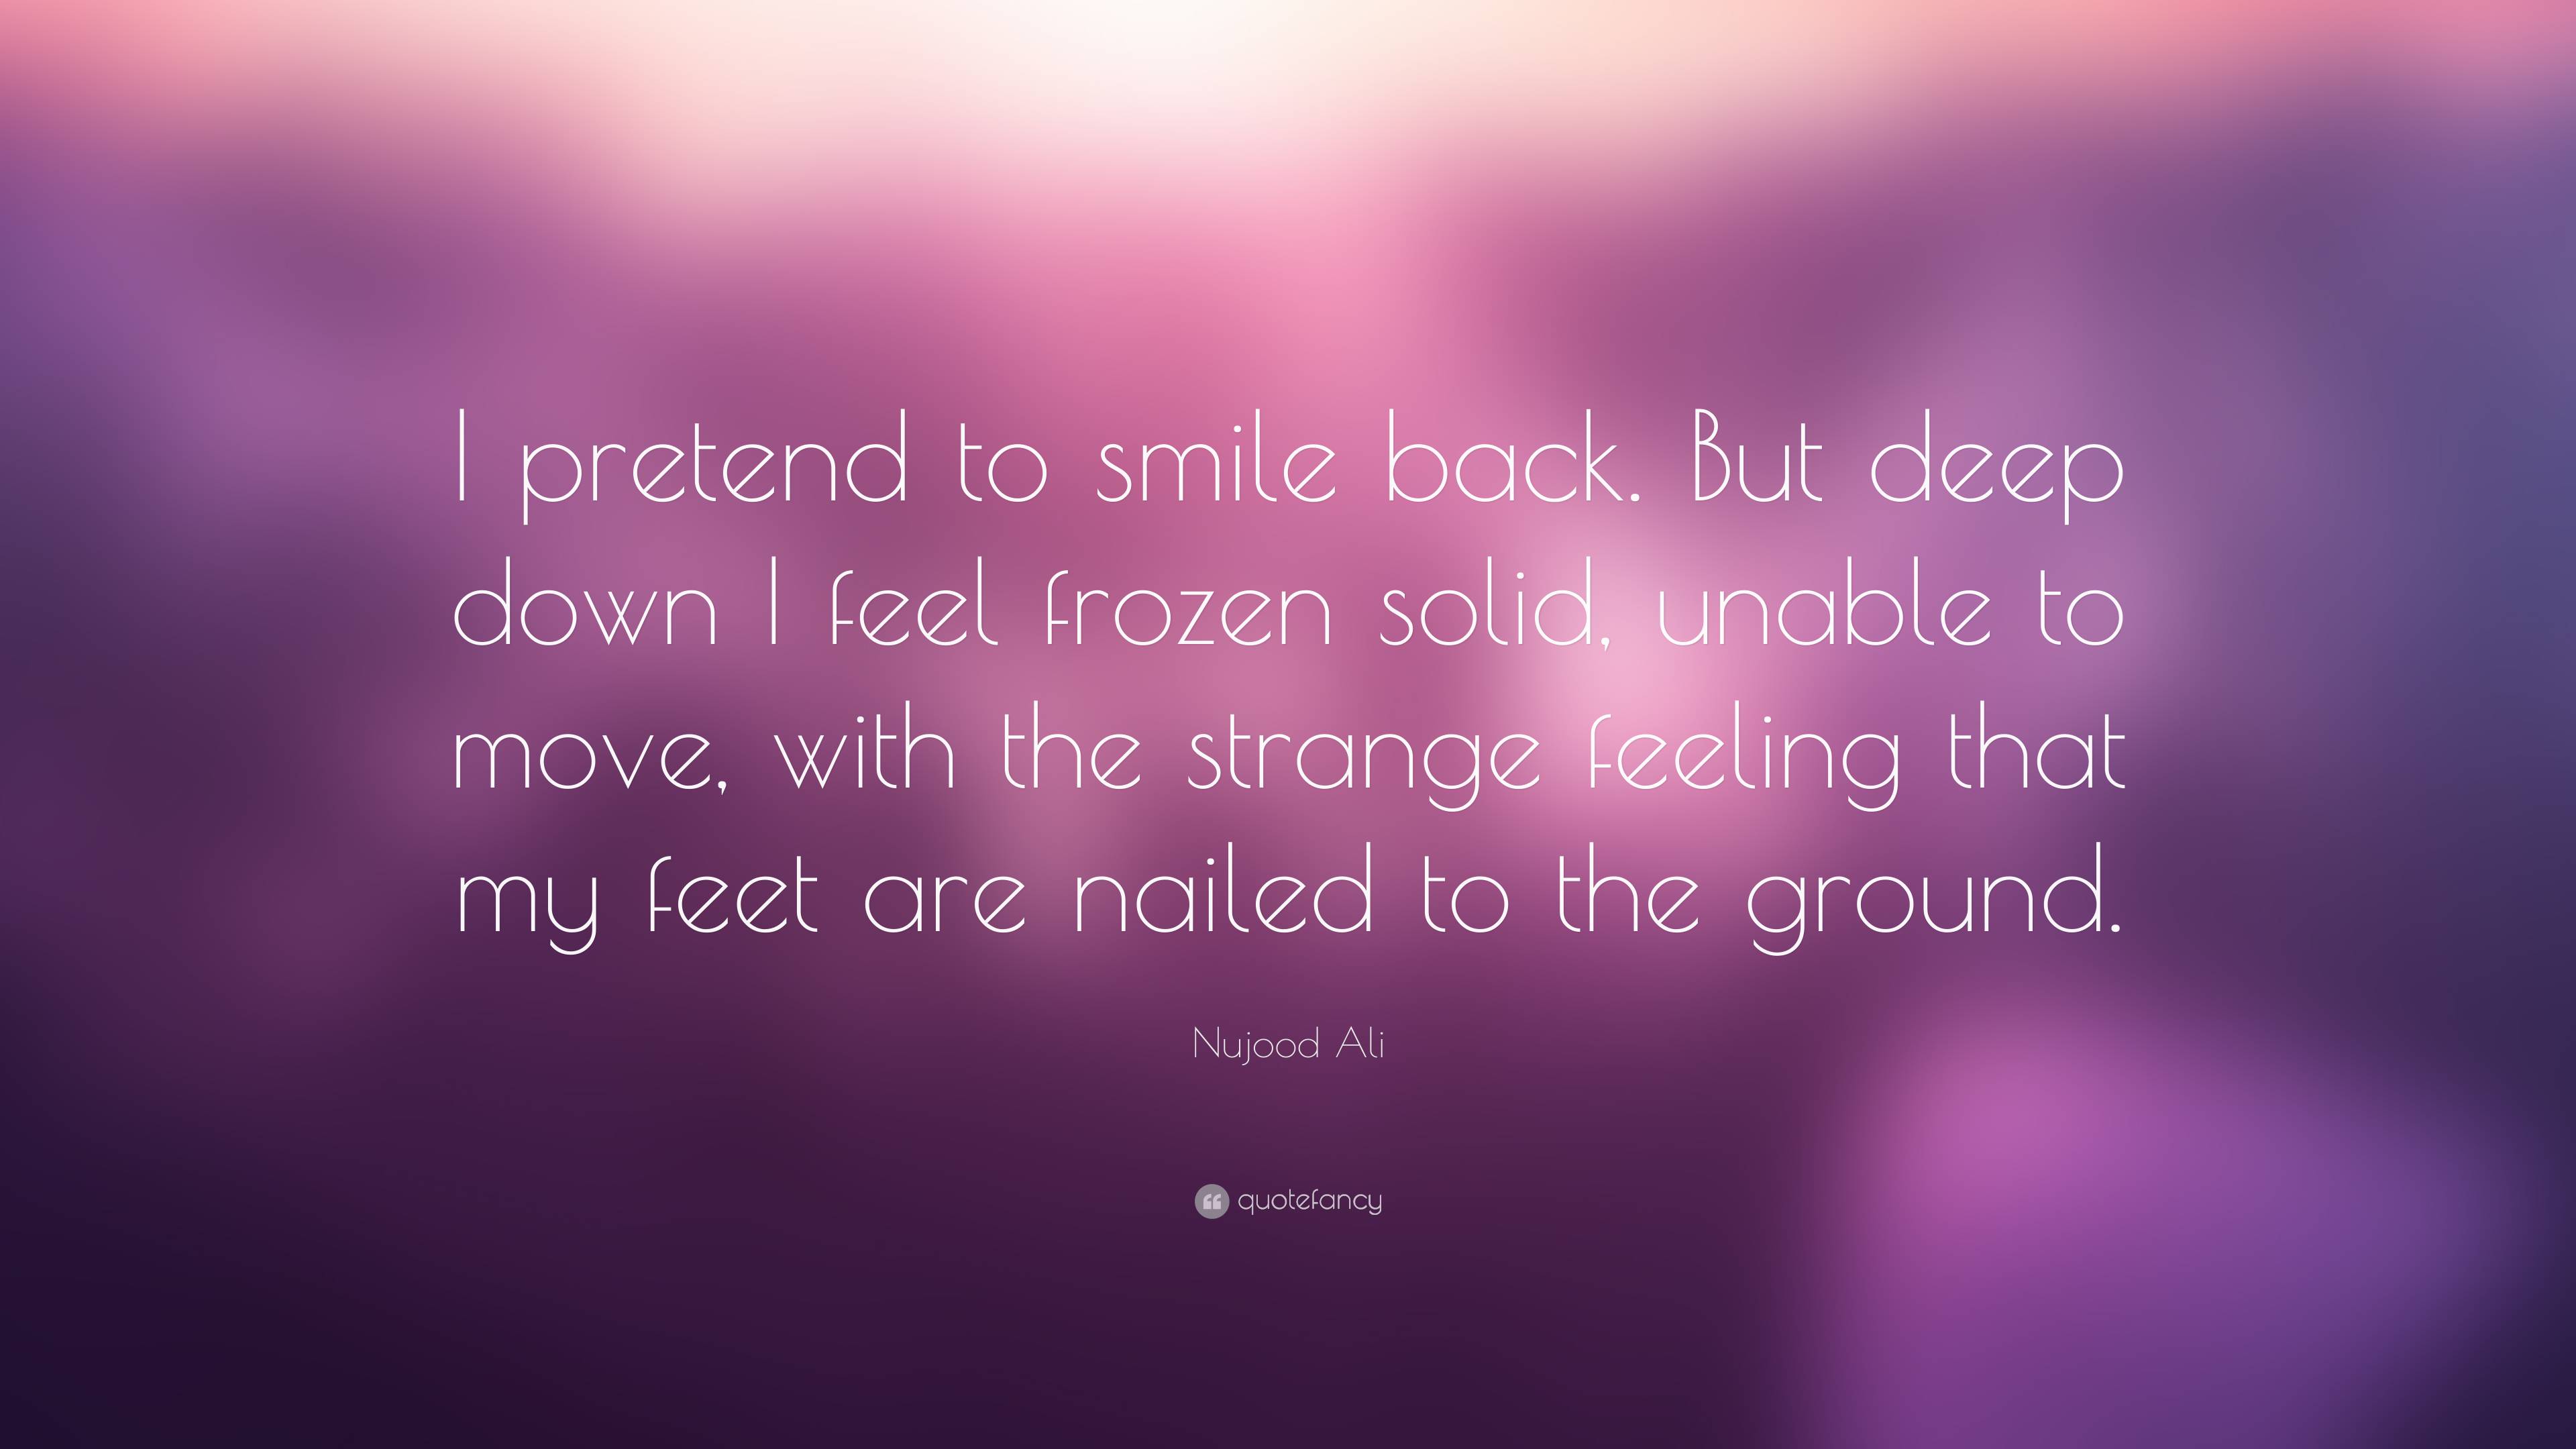 Nujood Ali Quote: “I pretend to smile back. But deep down I feel frozen ...